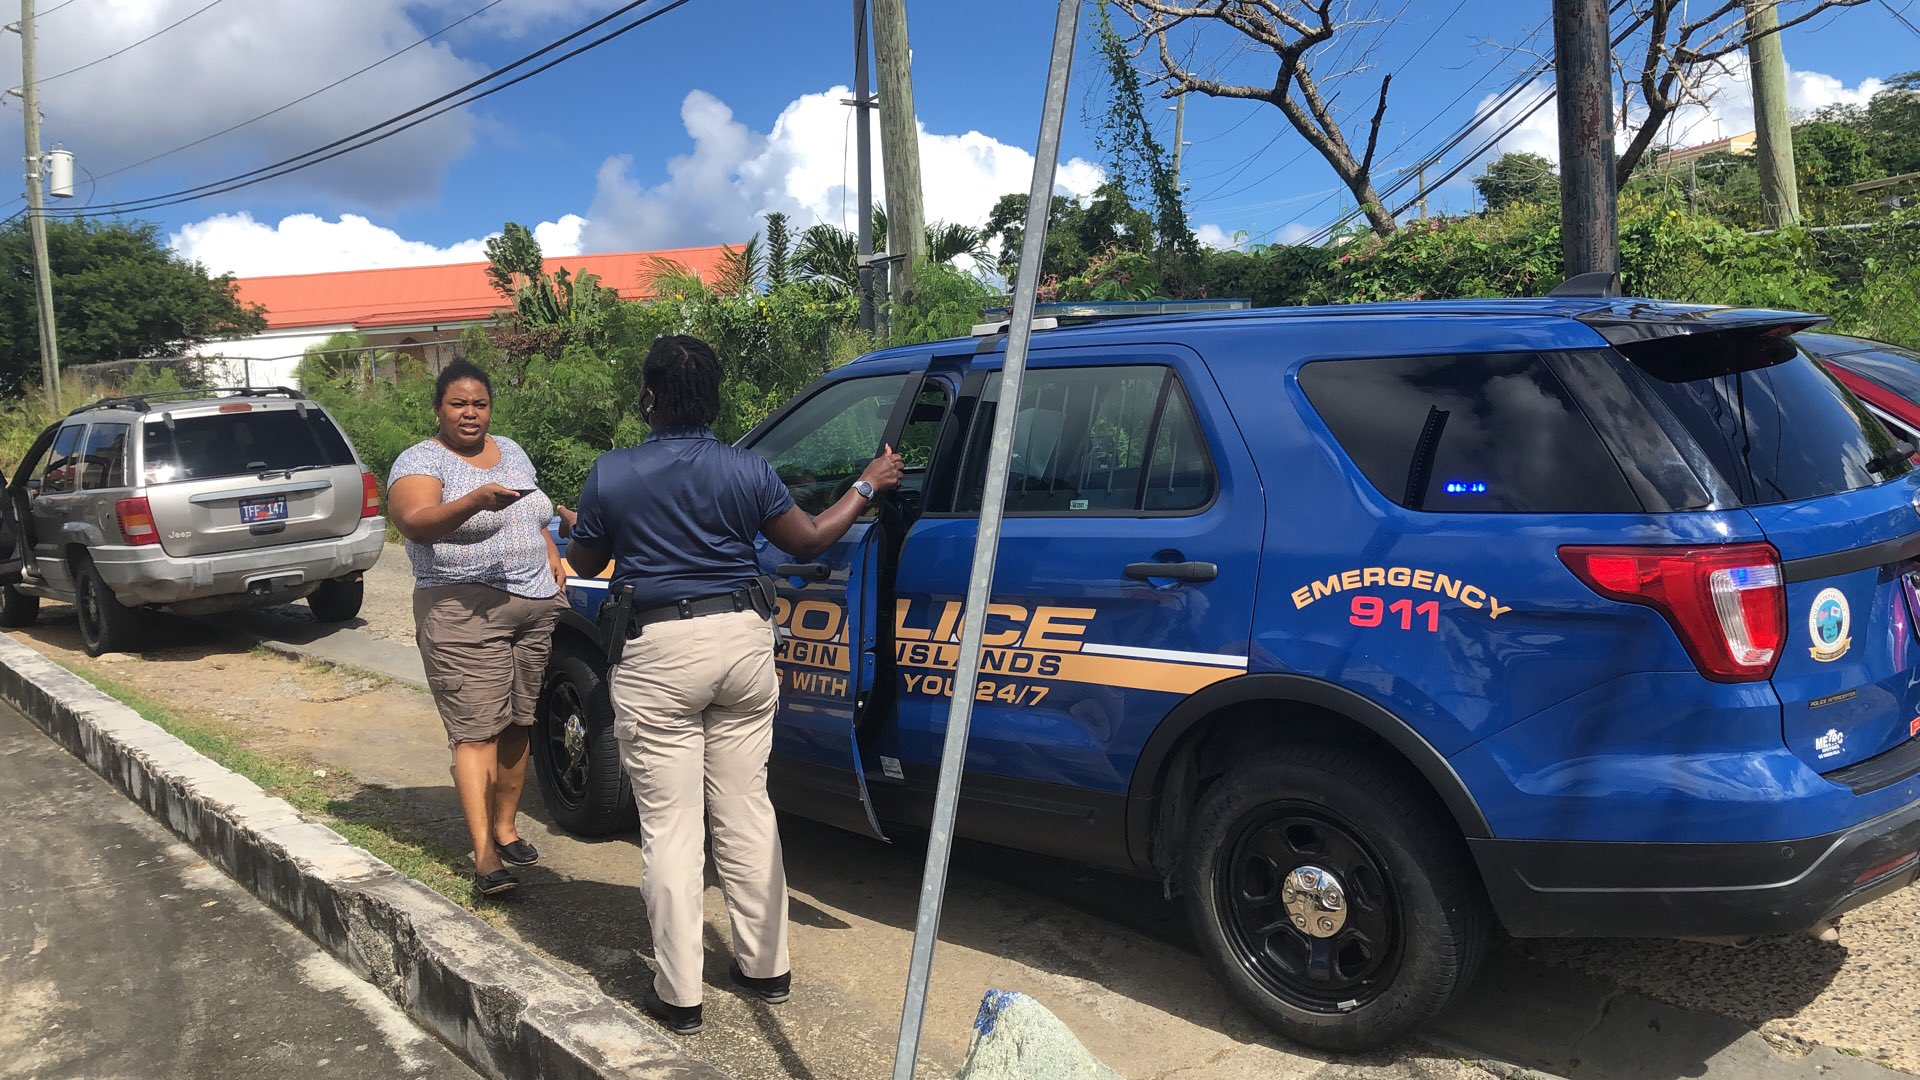 VIPD Exercises 'Community Policing' On St. Thomas ... Practicing 'Education Before Citation'